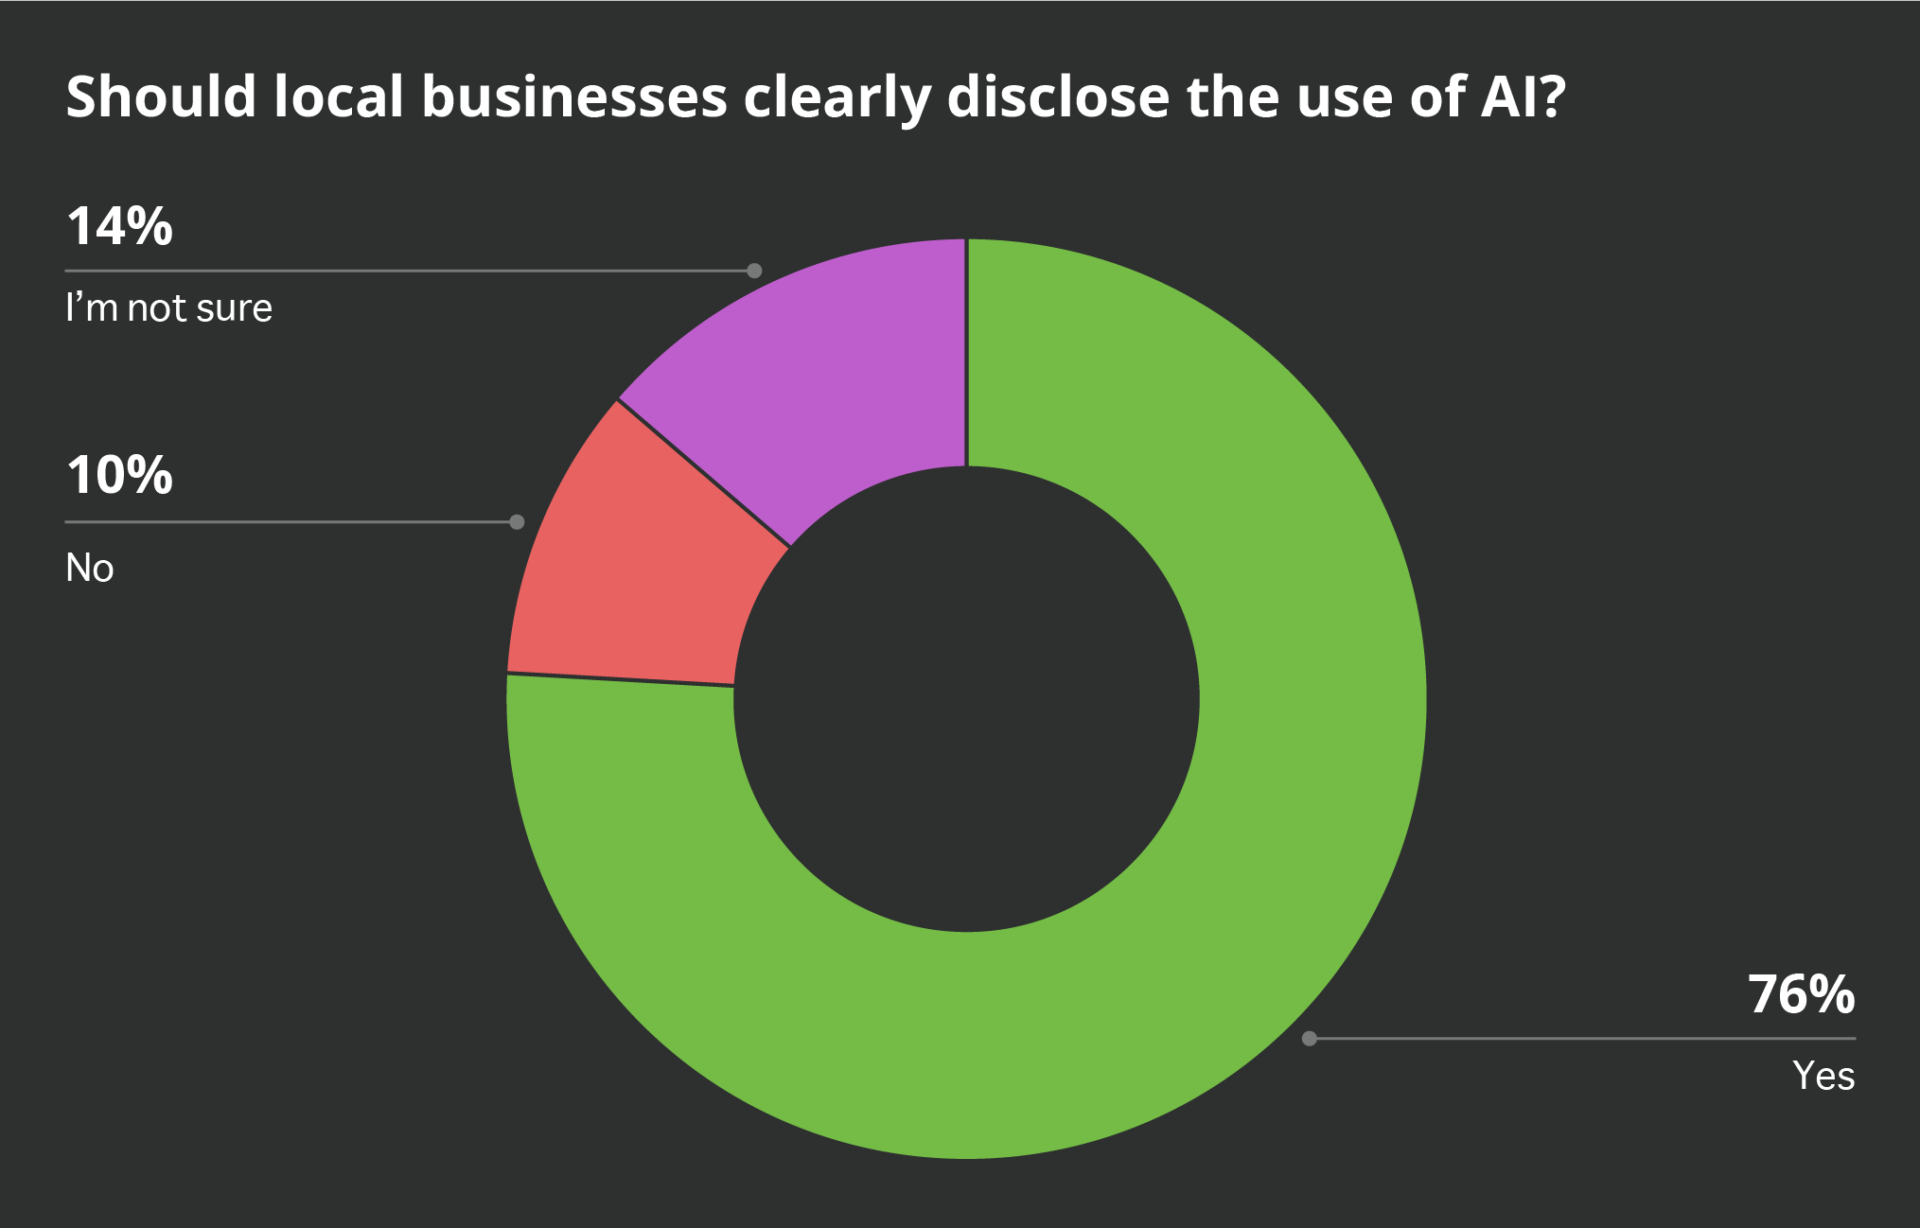 A circle chart on a black background highlighting people's responses for whether or not businesses should clearly disclose the use of AI